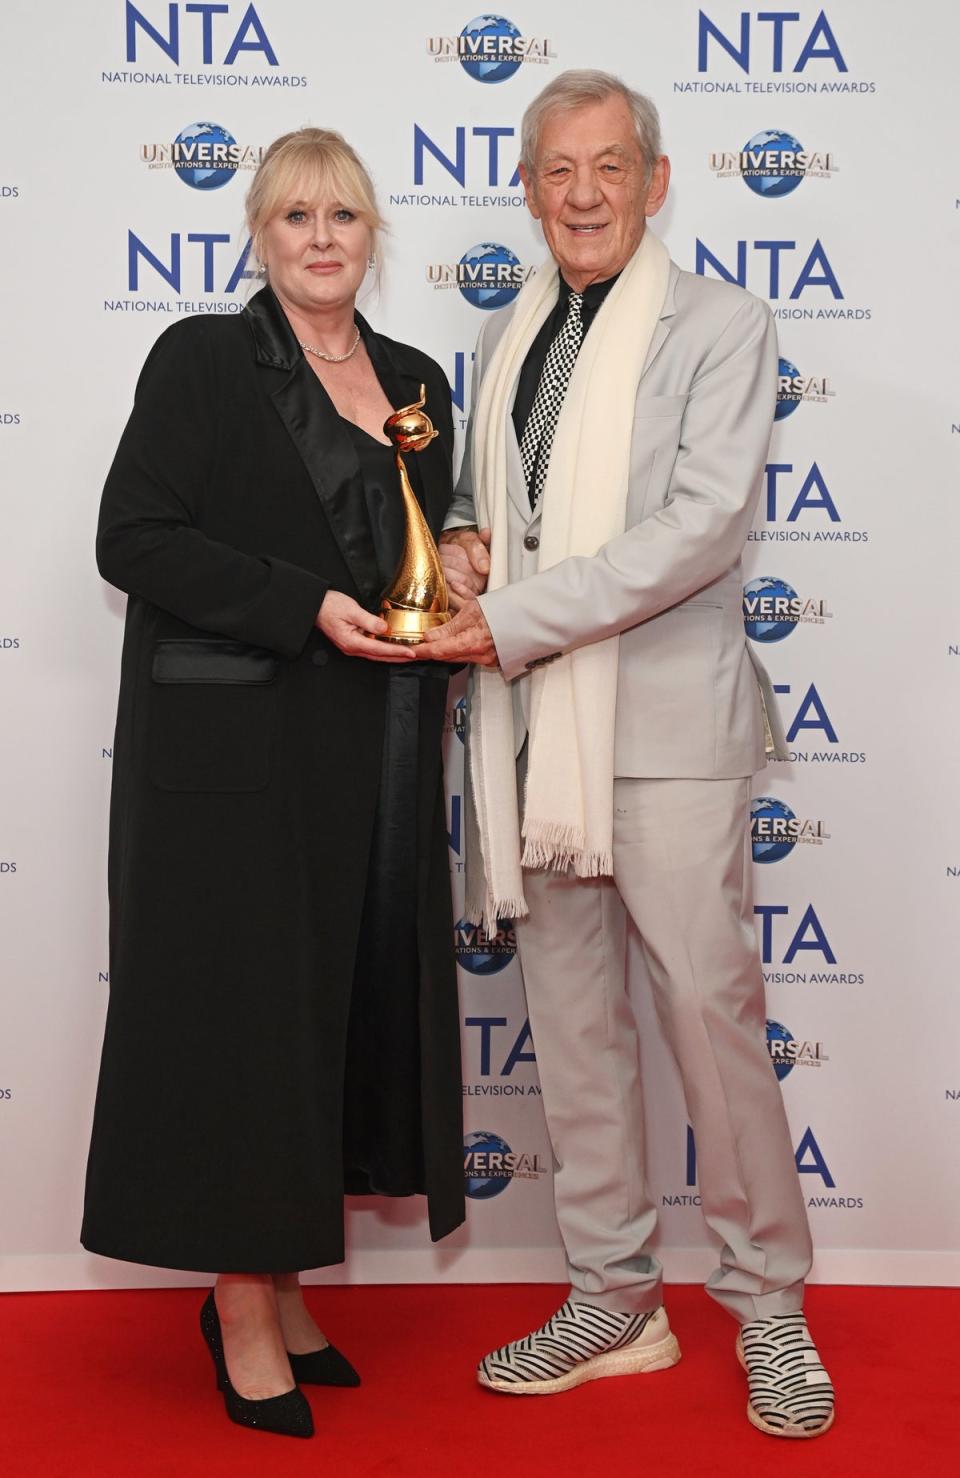 Sarah Lancashire, winner of the Special Recognition award and the Drama Performance award for her work in 